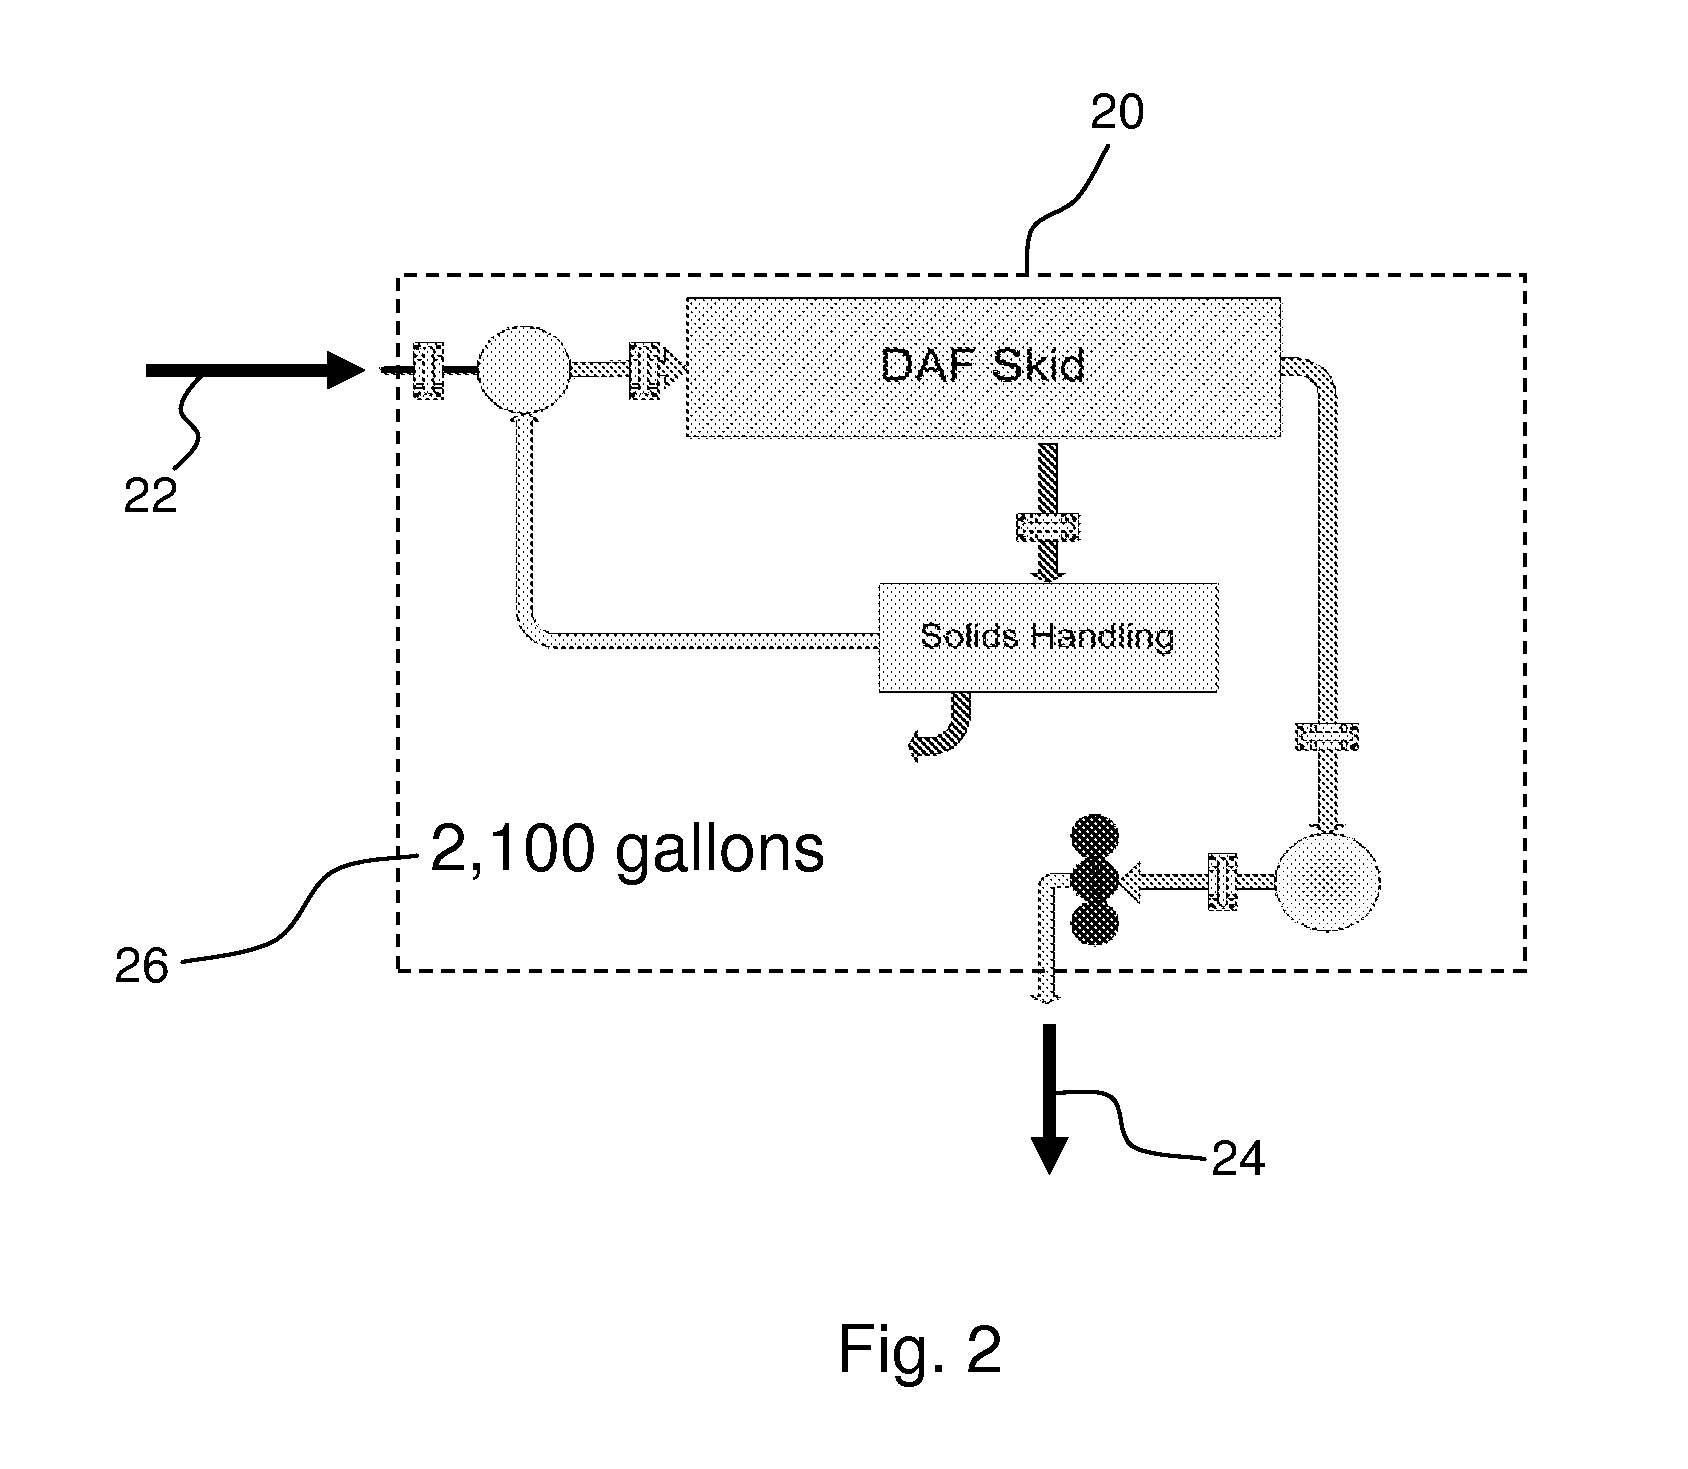 Automated apparatus and process for the controlled shutdown and start-up for a wastewater treatment system